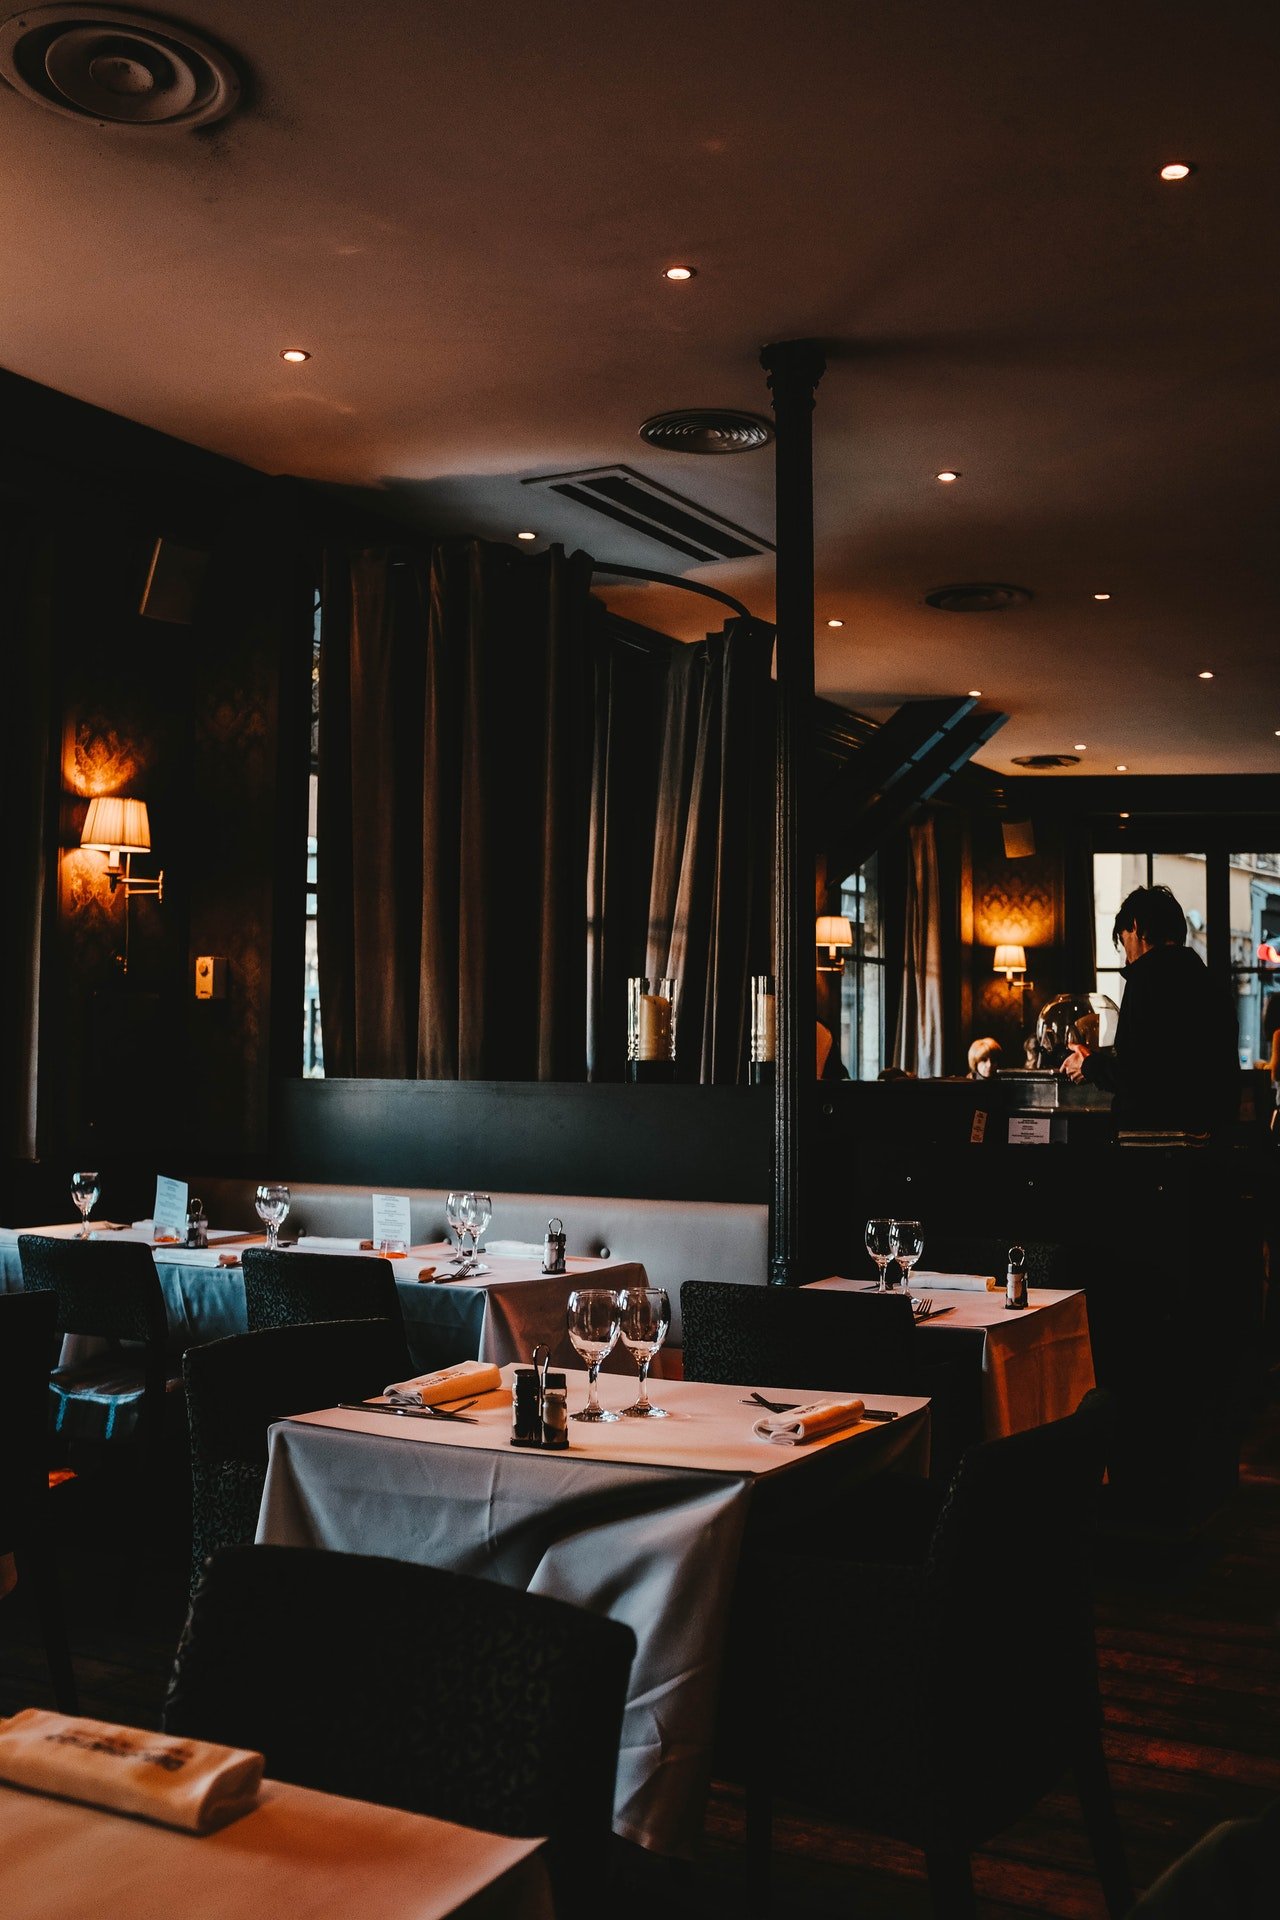 Inside view of a beautiful restaurant | Photo: Pexels